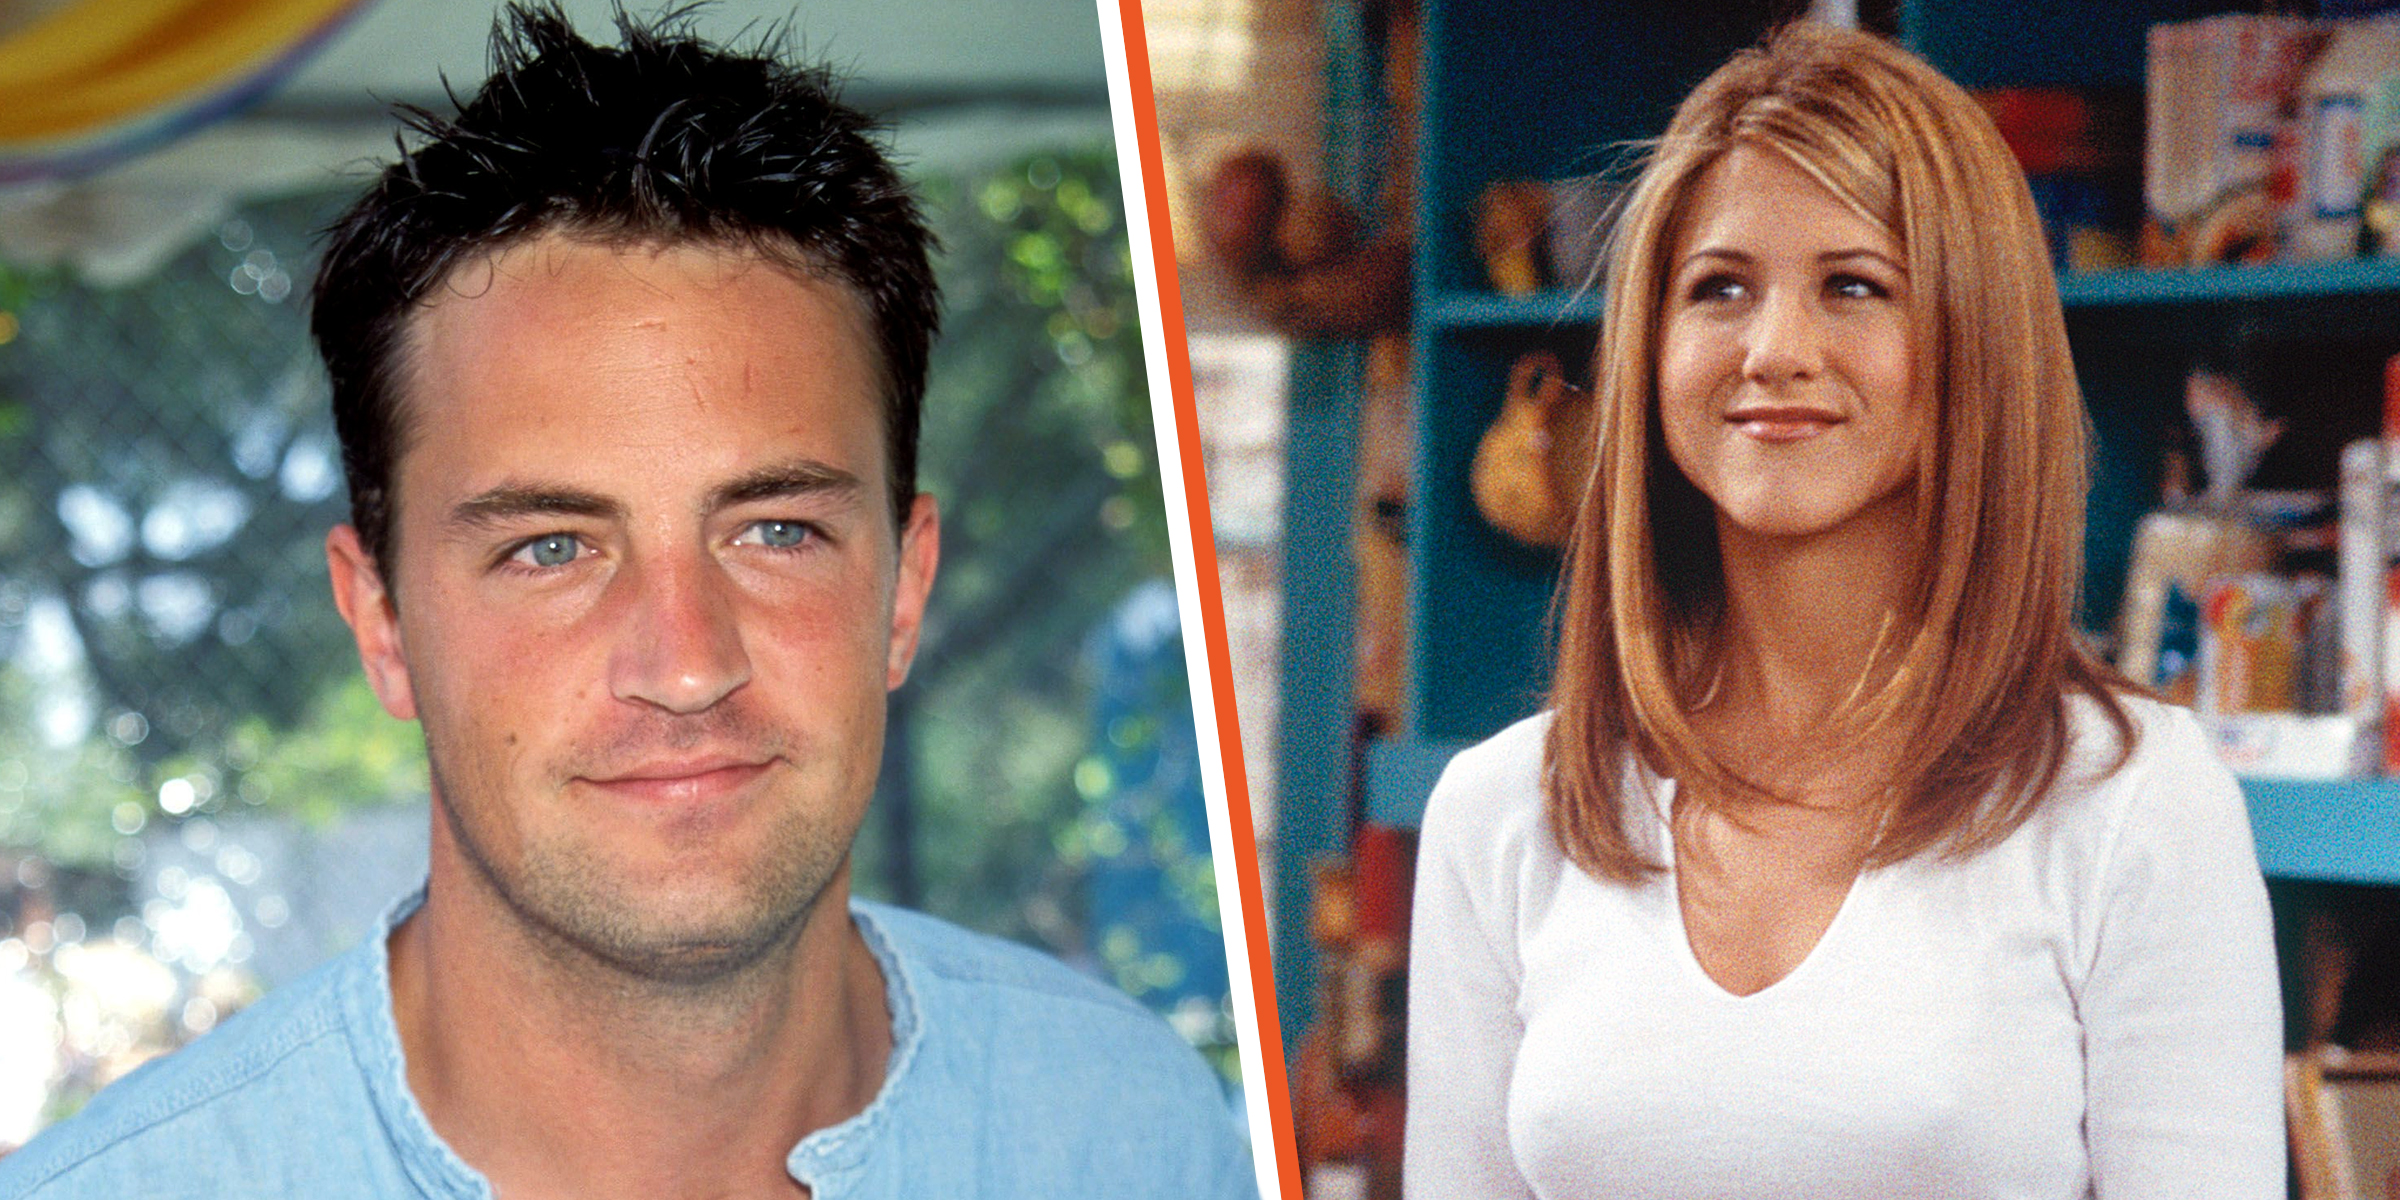 Matthew Perry | Jennifer Aniston | Sources: Getty Images